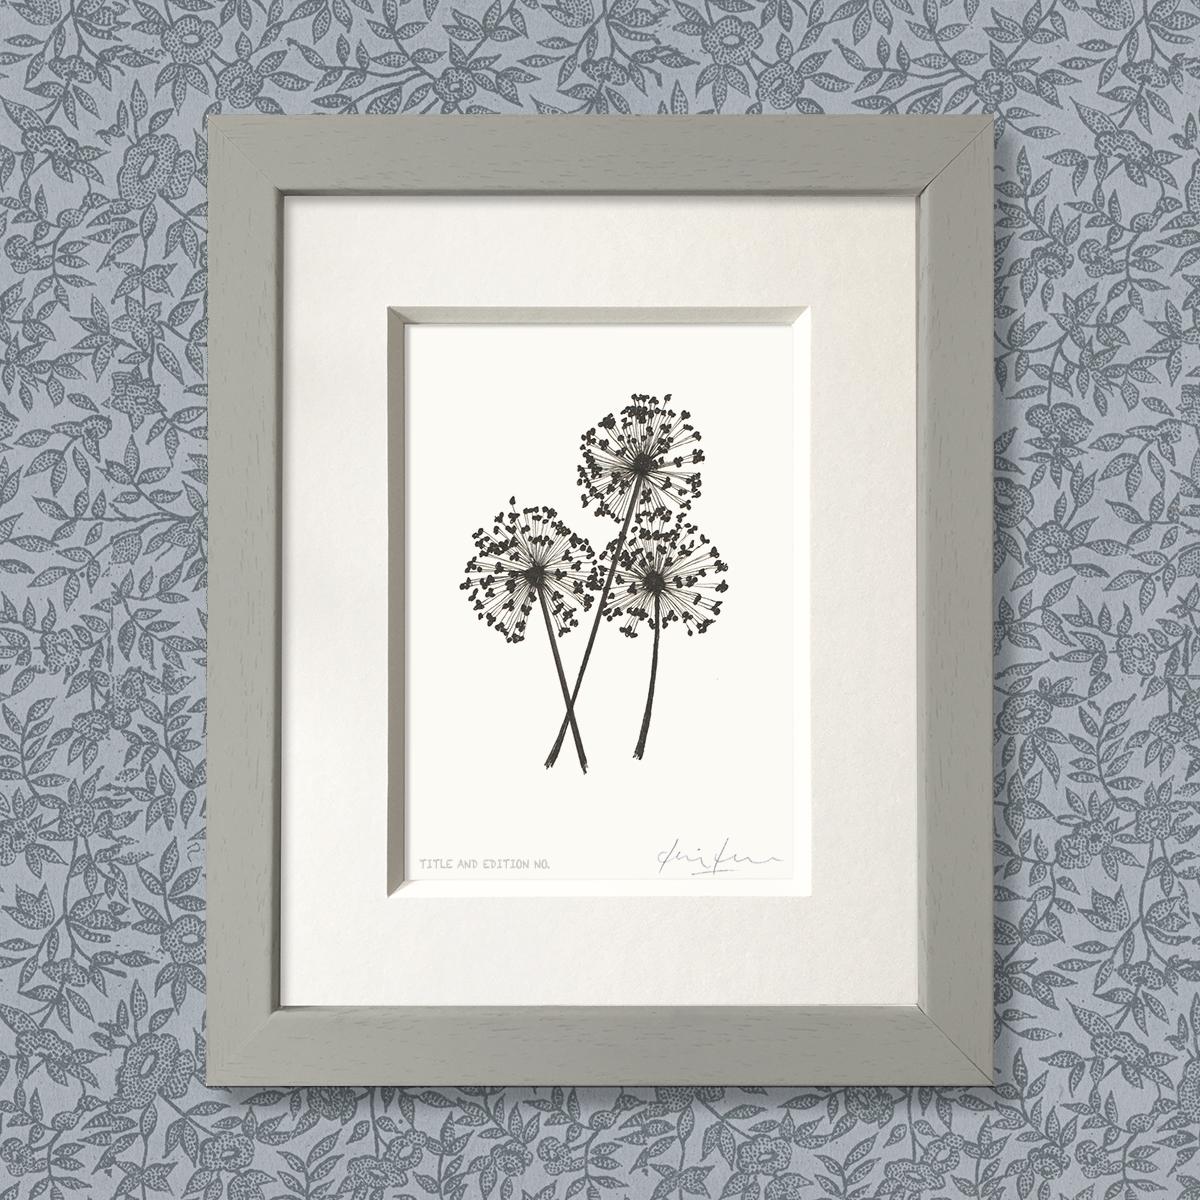 Limited edition print from pen and ink drawing of alliums in a grey frame